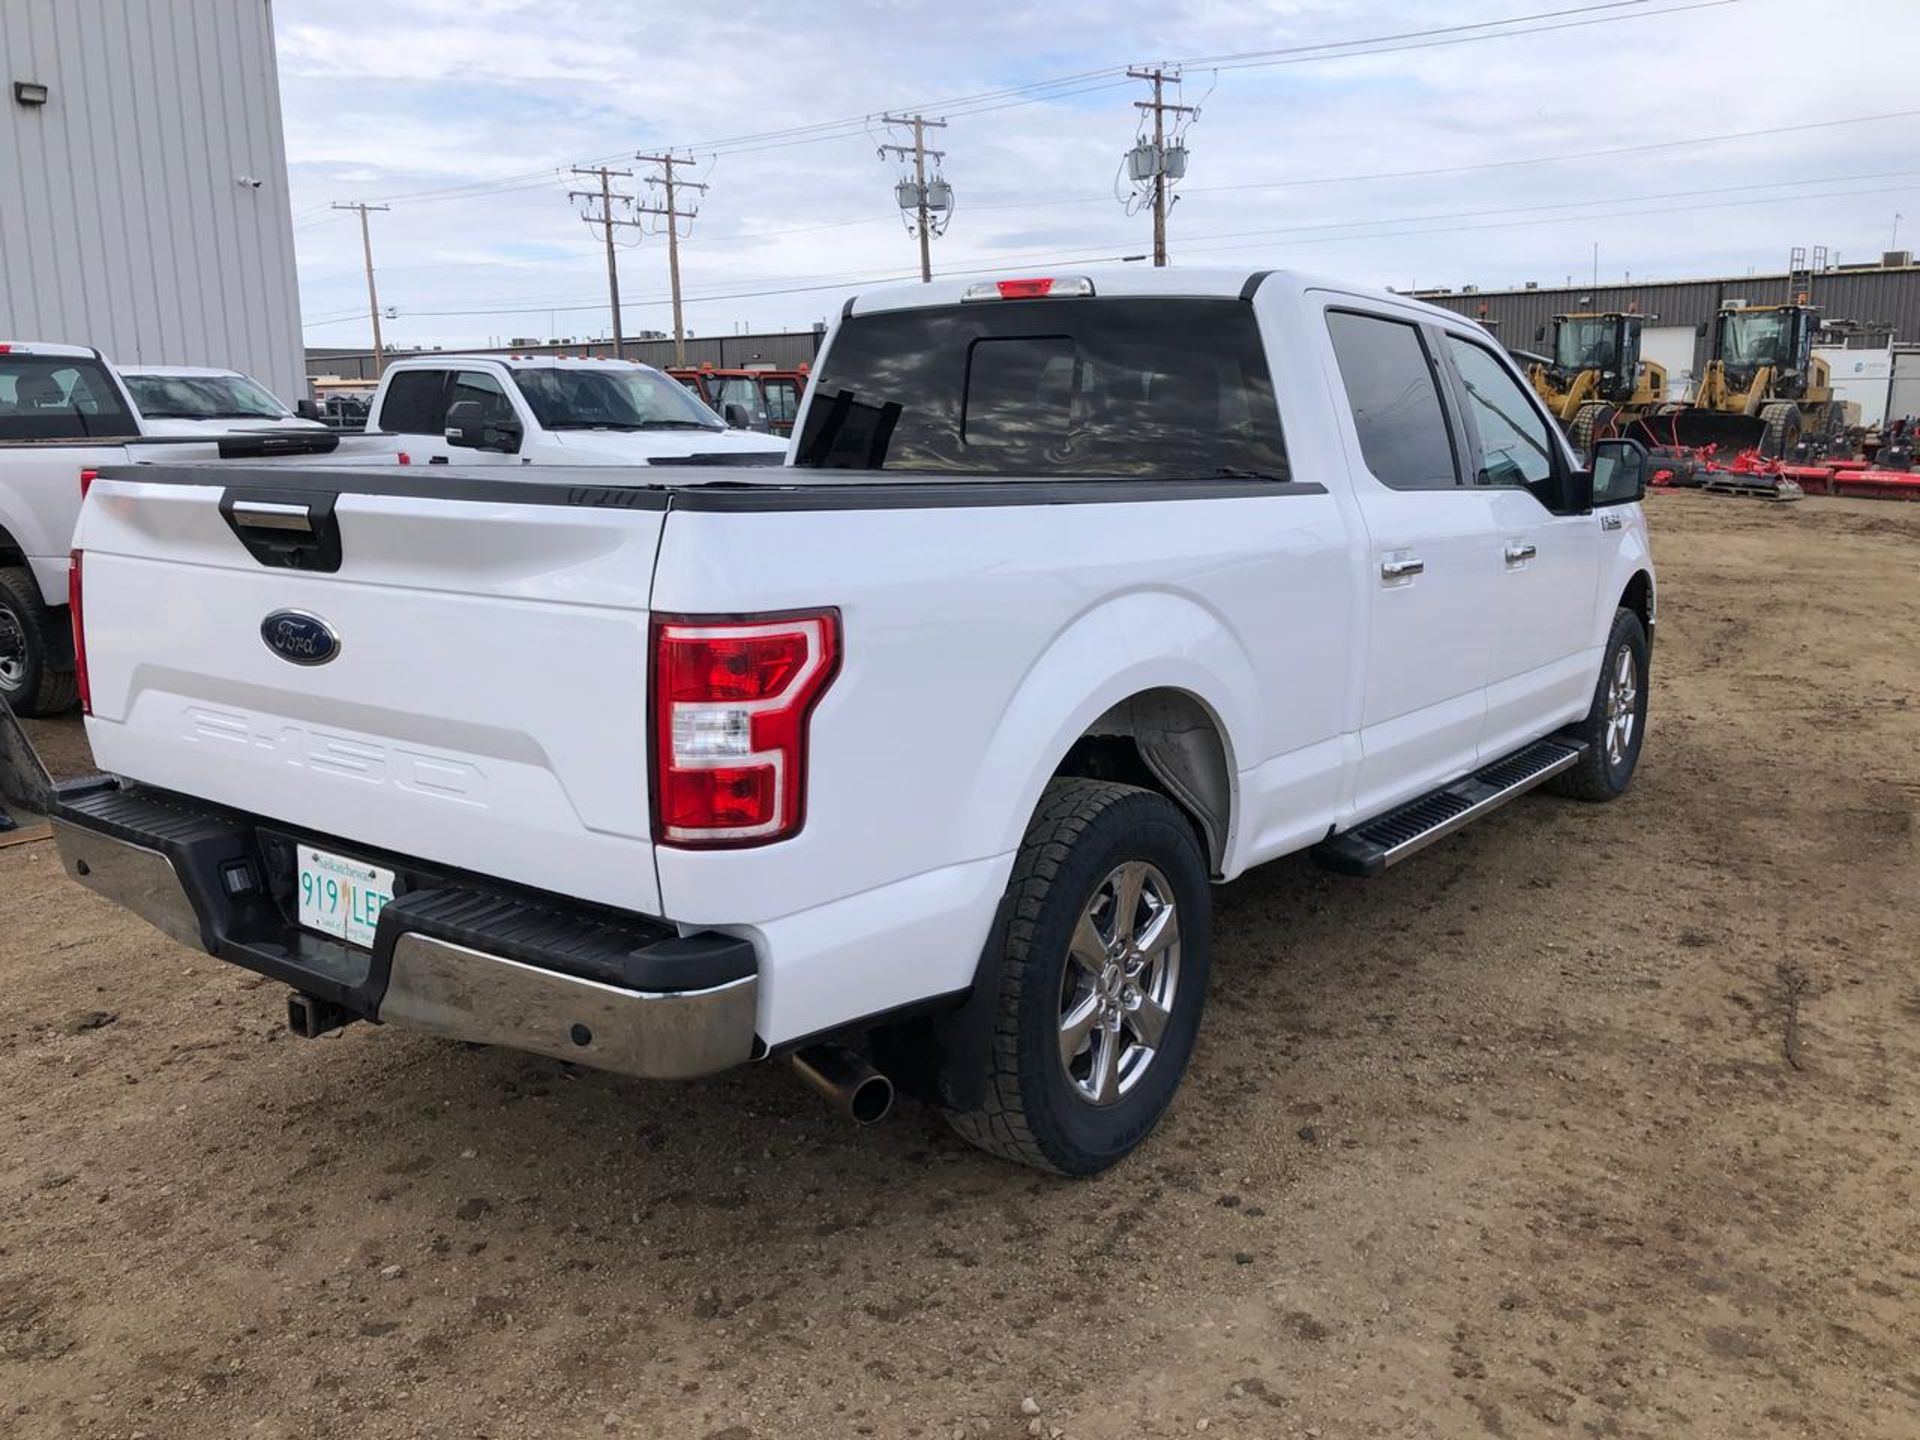 2018 Ford F150 Pick-up Truck - Image 7 of 13